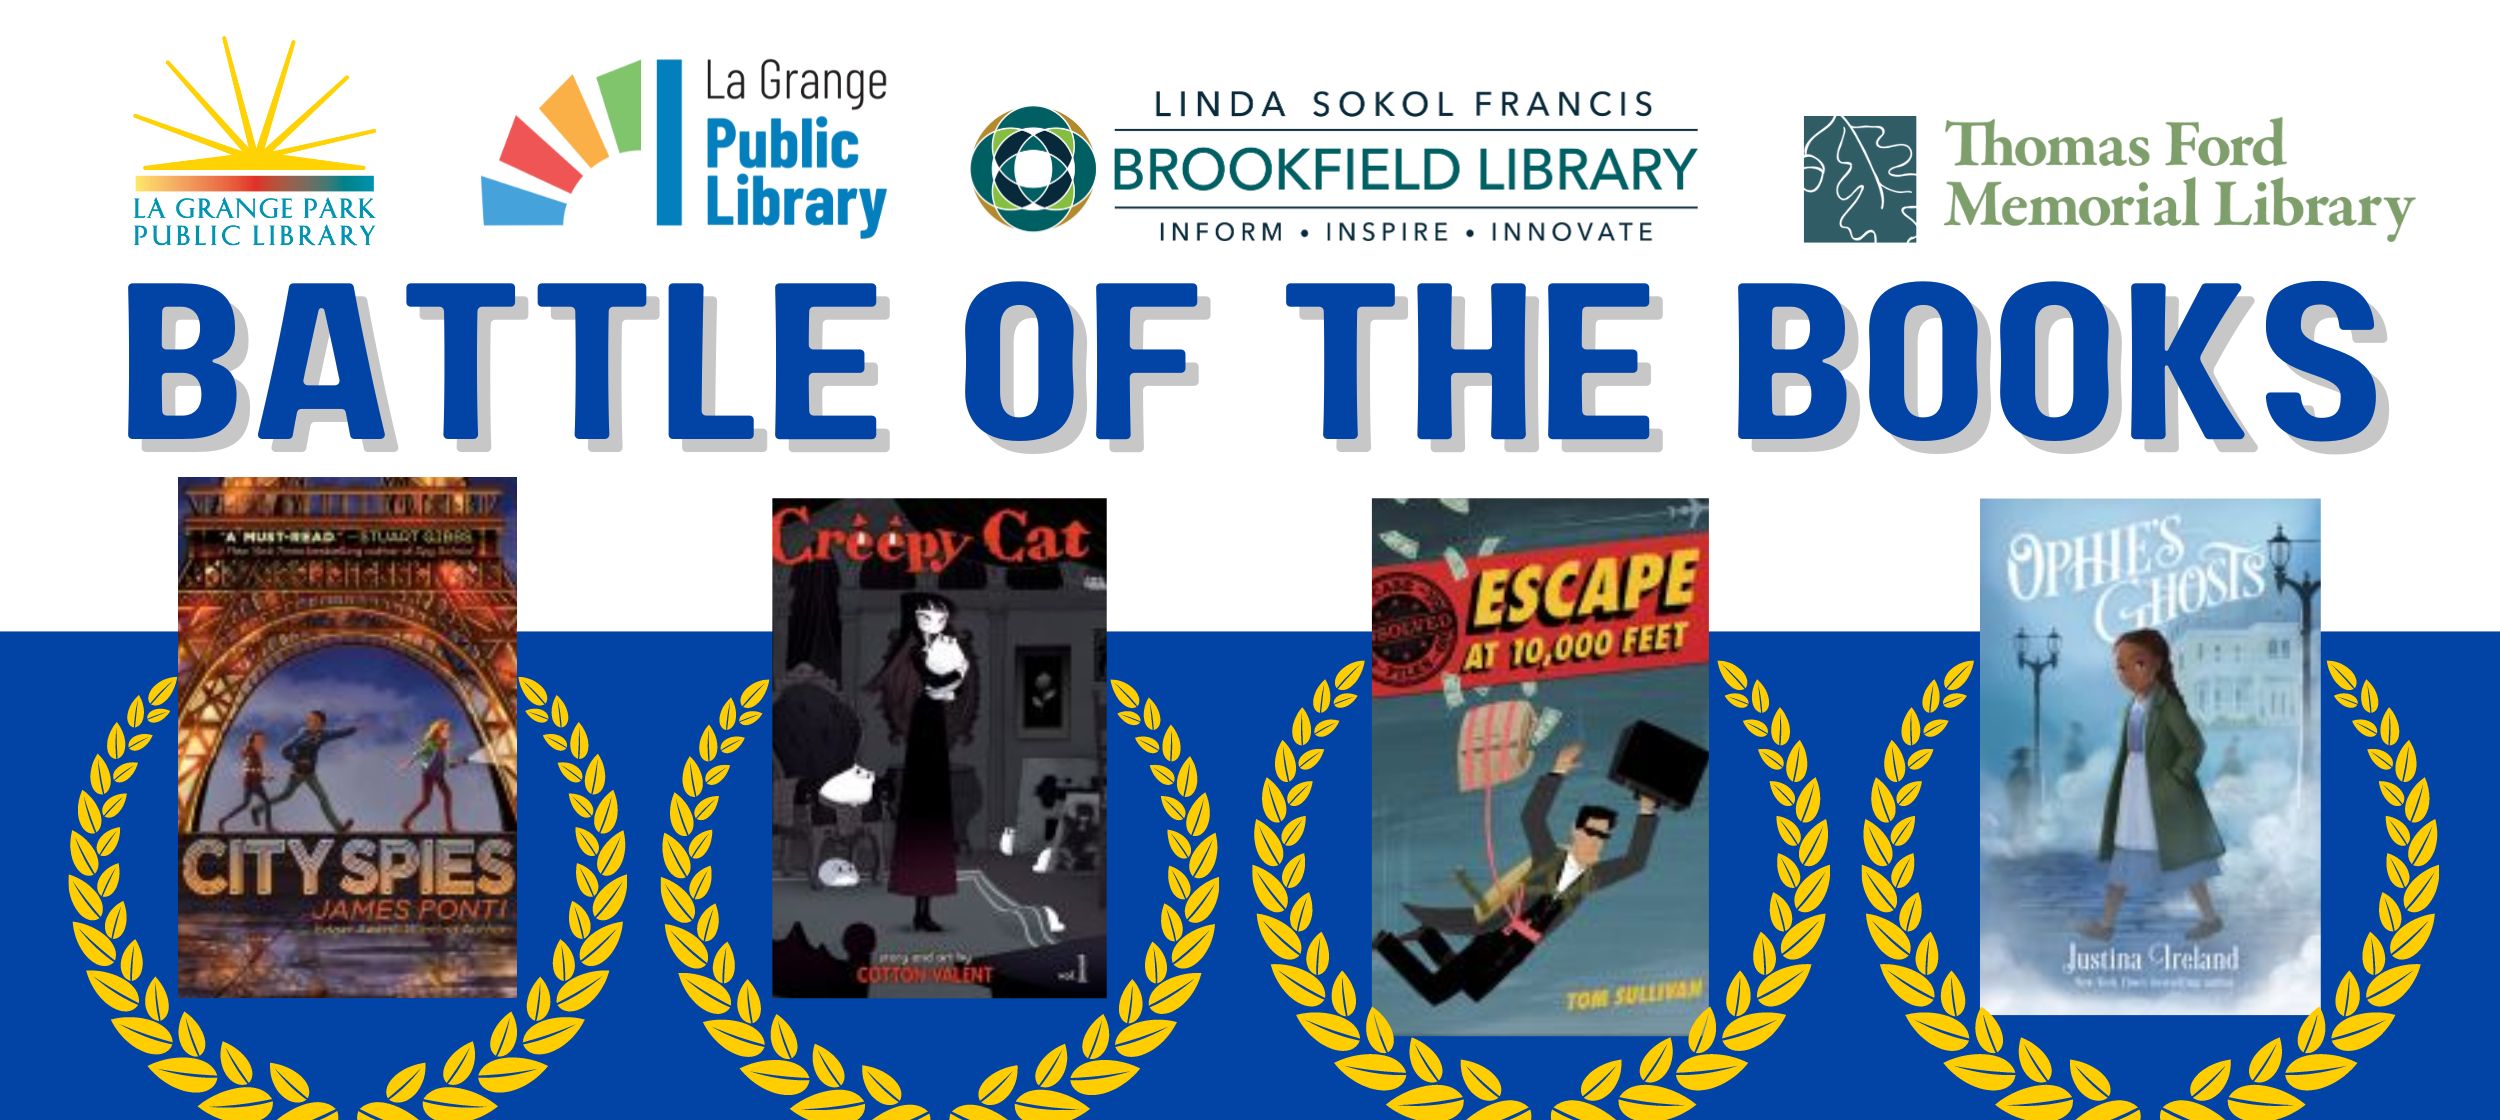 Library Battle of the Books - Book Titles